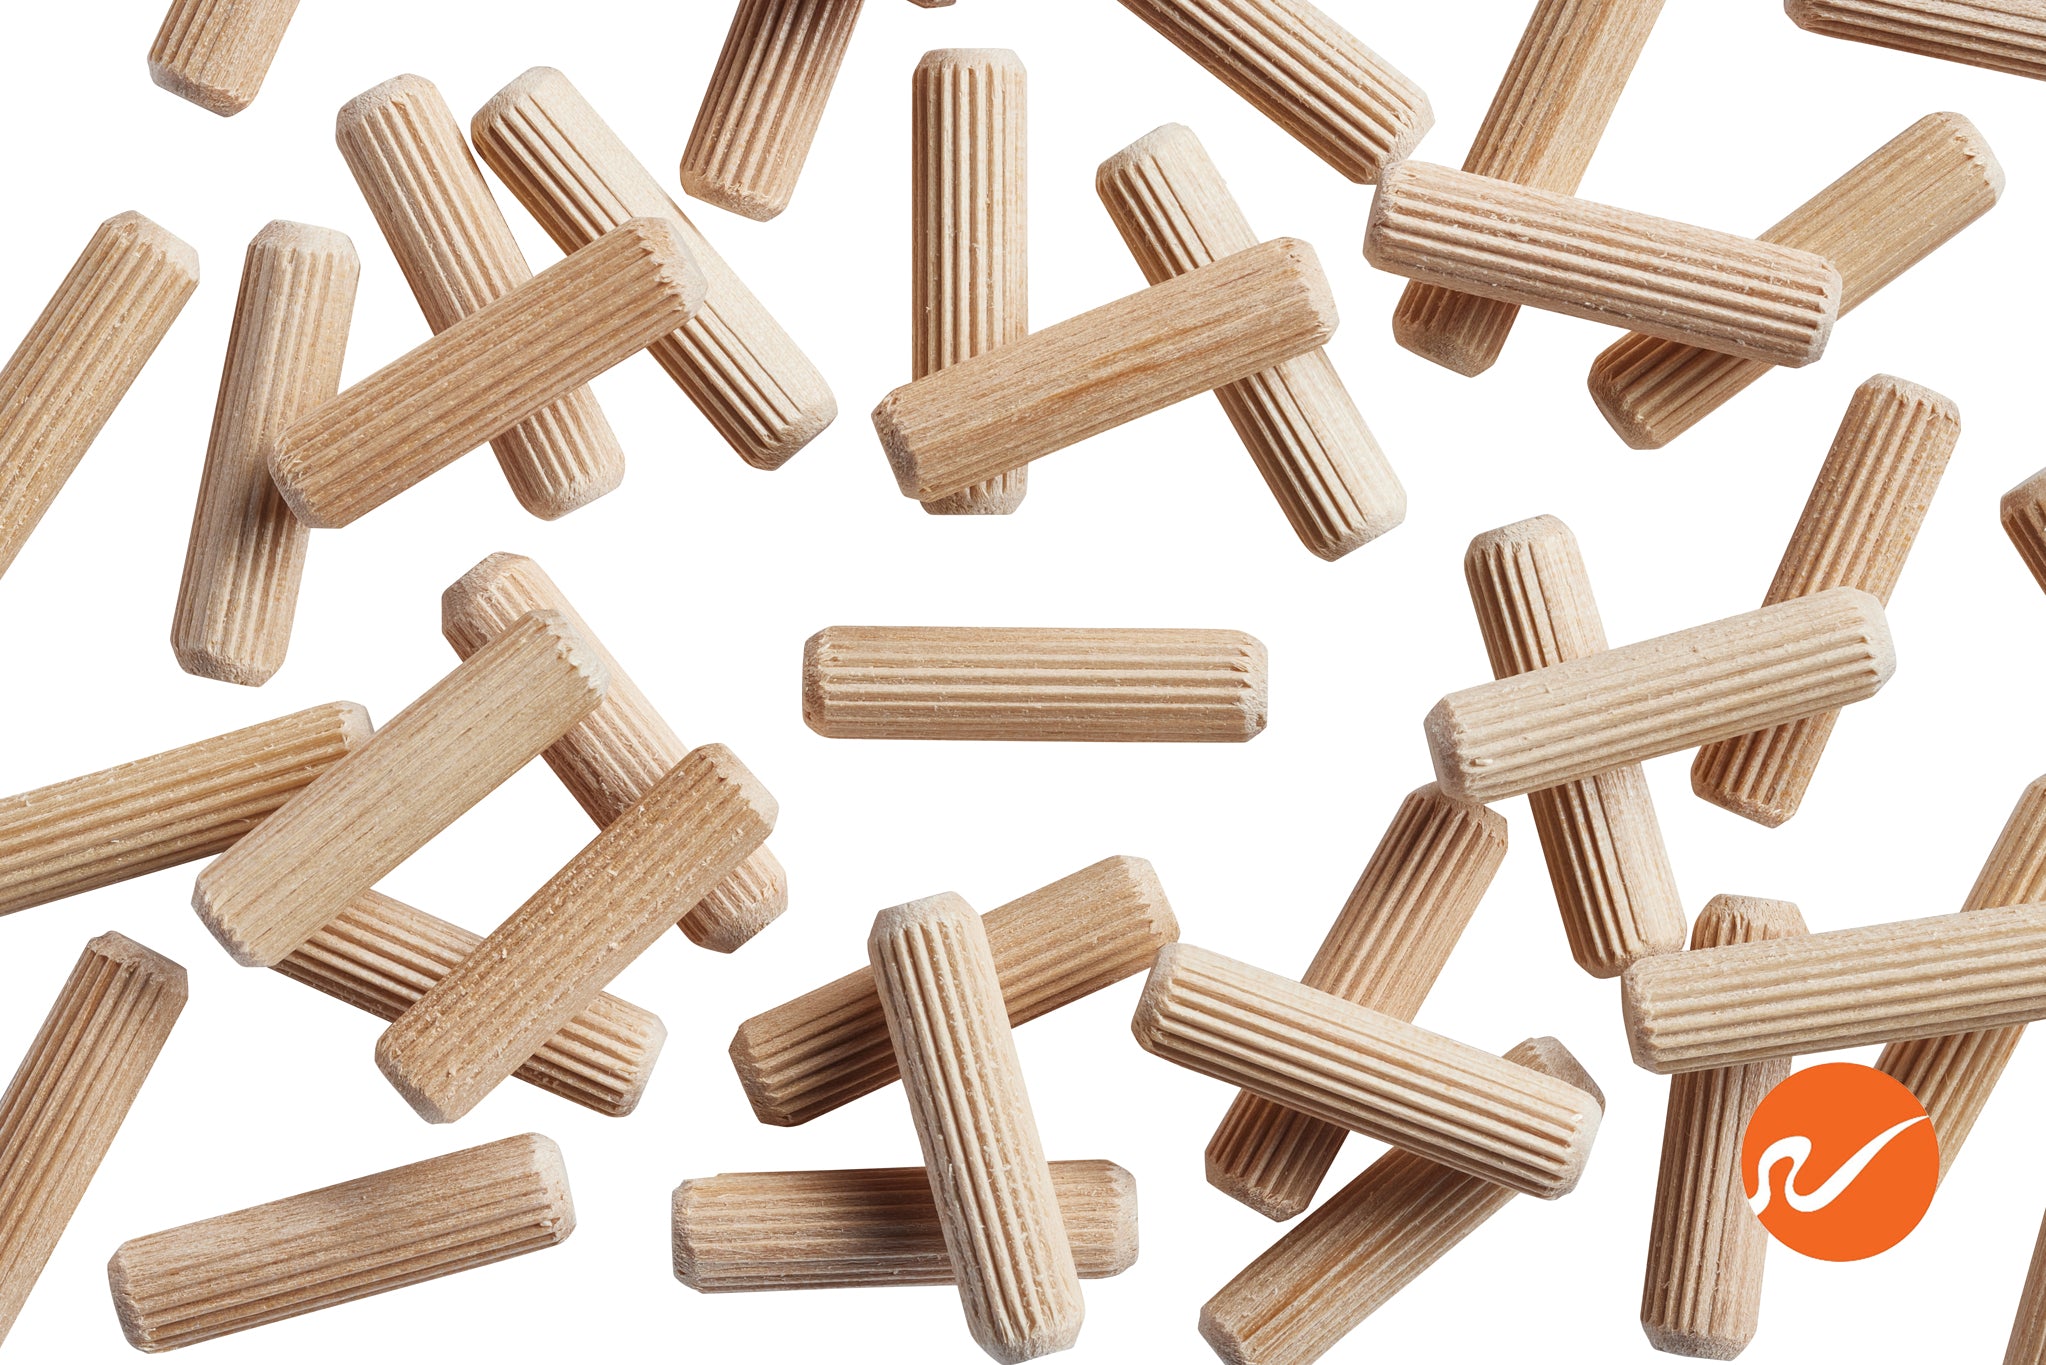  Wooden Dowel Pins Approx 1/4” 5/16” 3/8 (6mm 8mm 10mm) Wooden  dowls Dried Fluted and Beveled, Made of Hardwood (6*30+8*40+10*40-500PCS) :  Arts, Crafts & Sewing